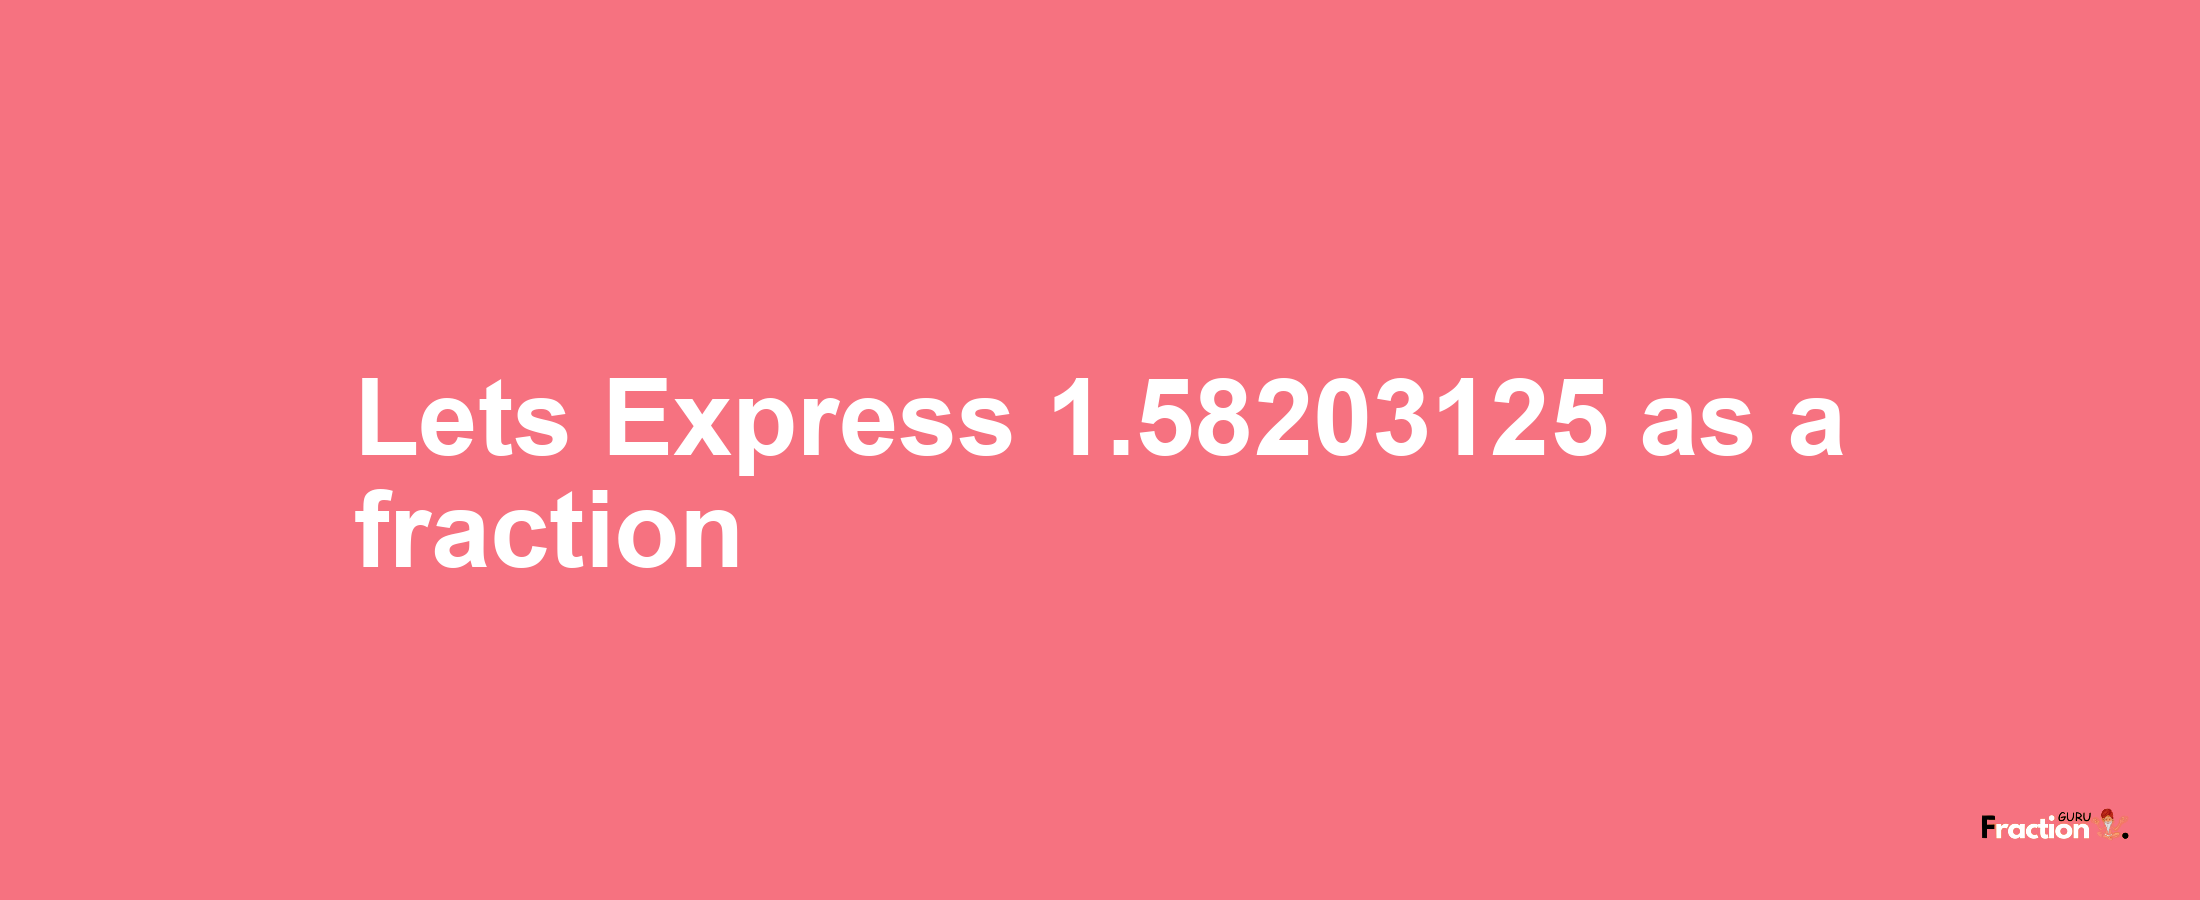 Lets Express 1.58203125 as afraction